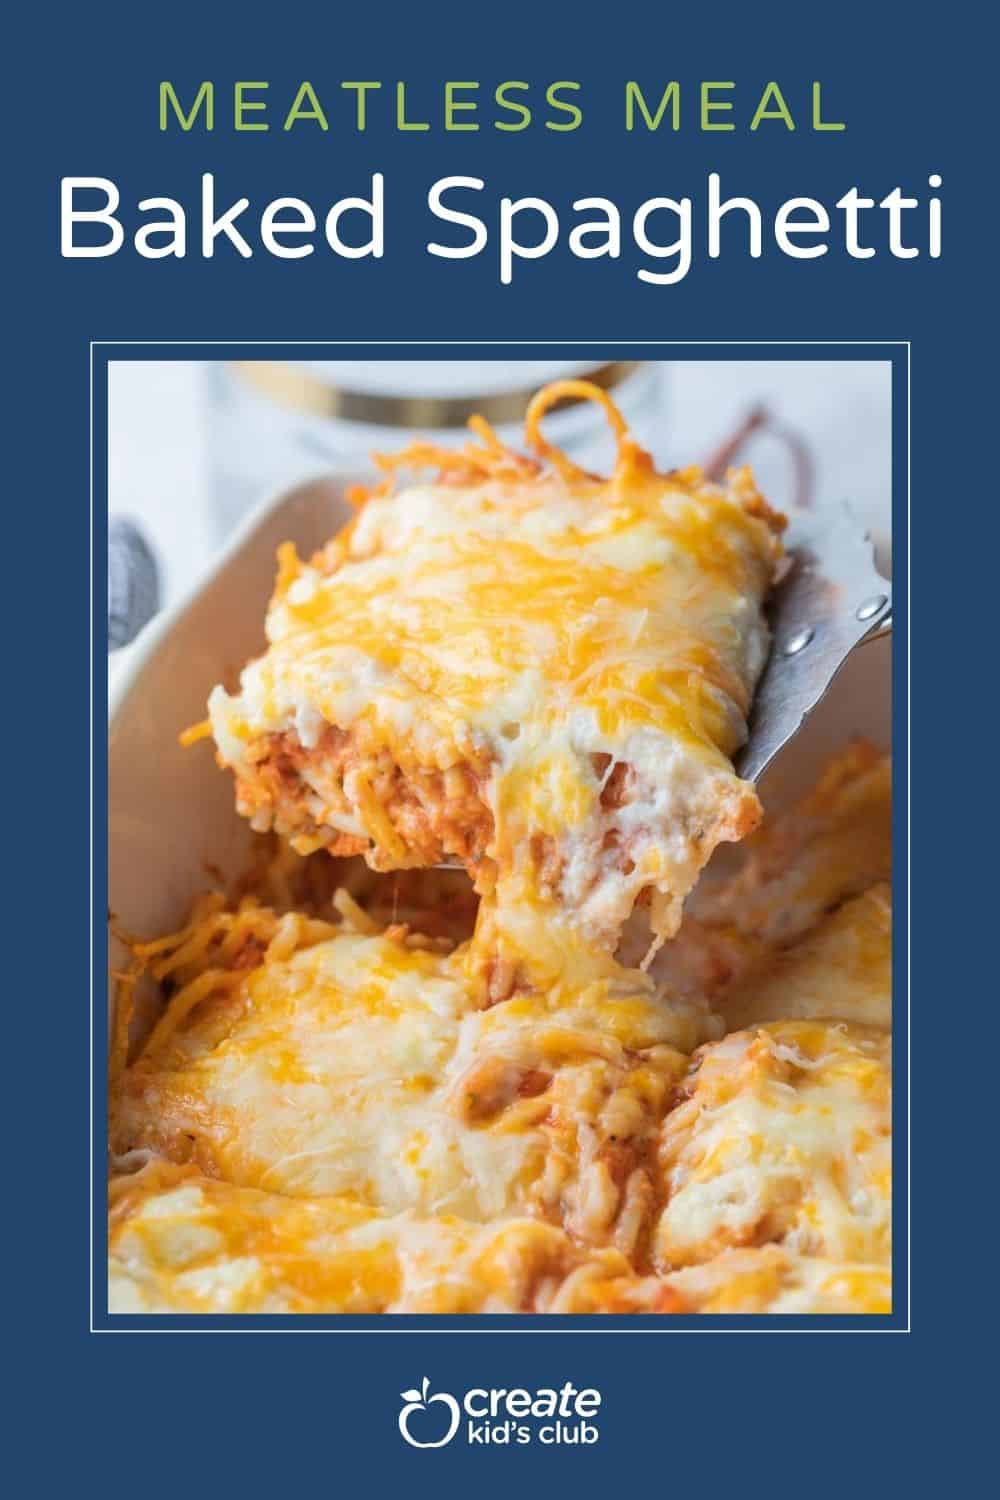 pin of baked spaghetti shown with a slice being removed